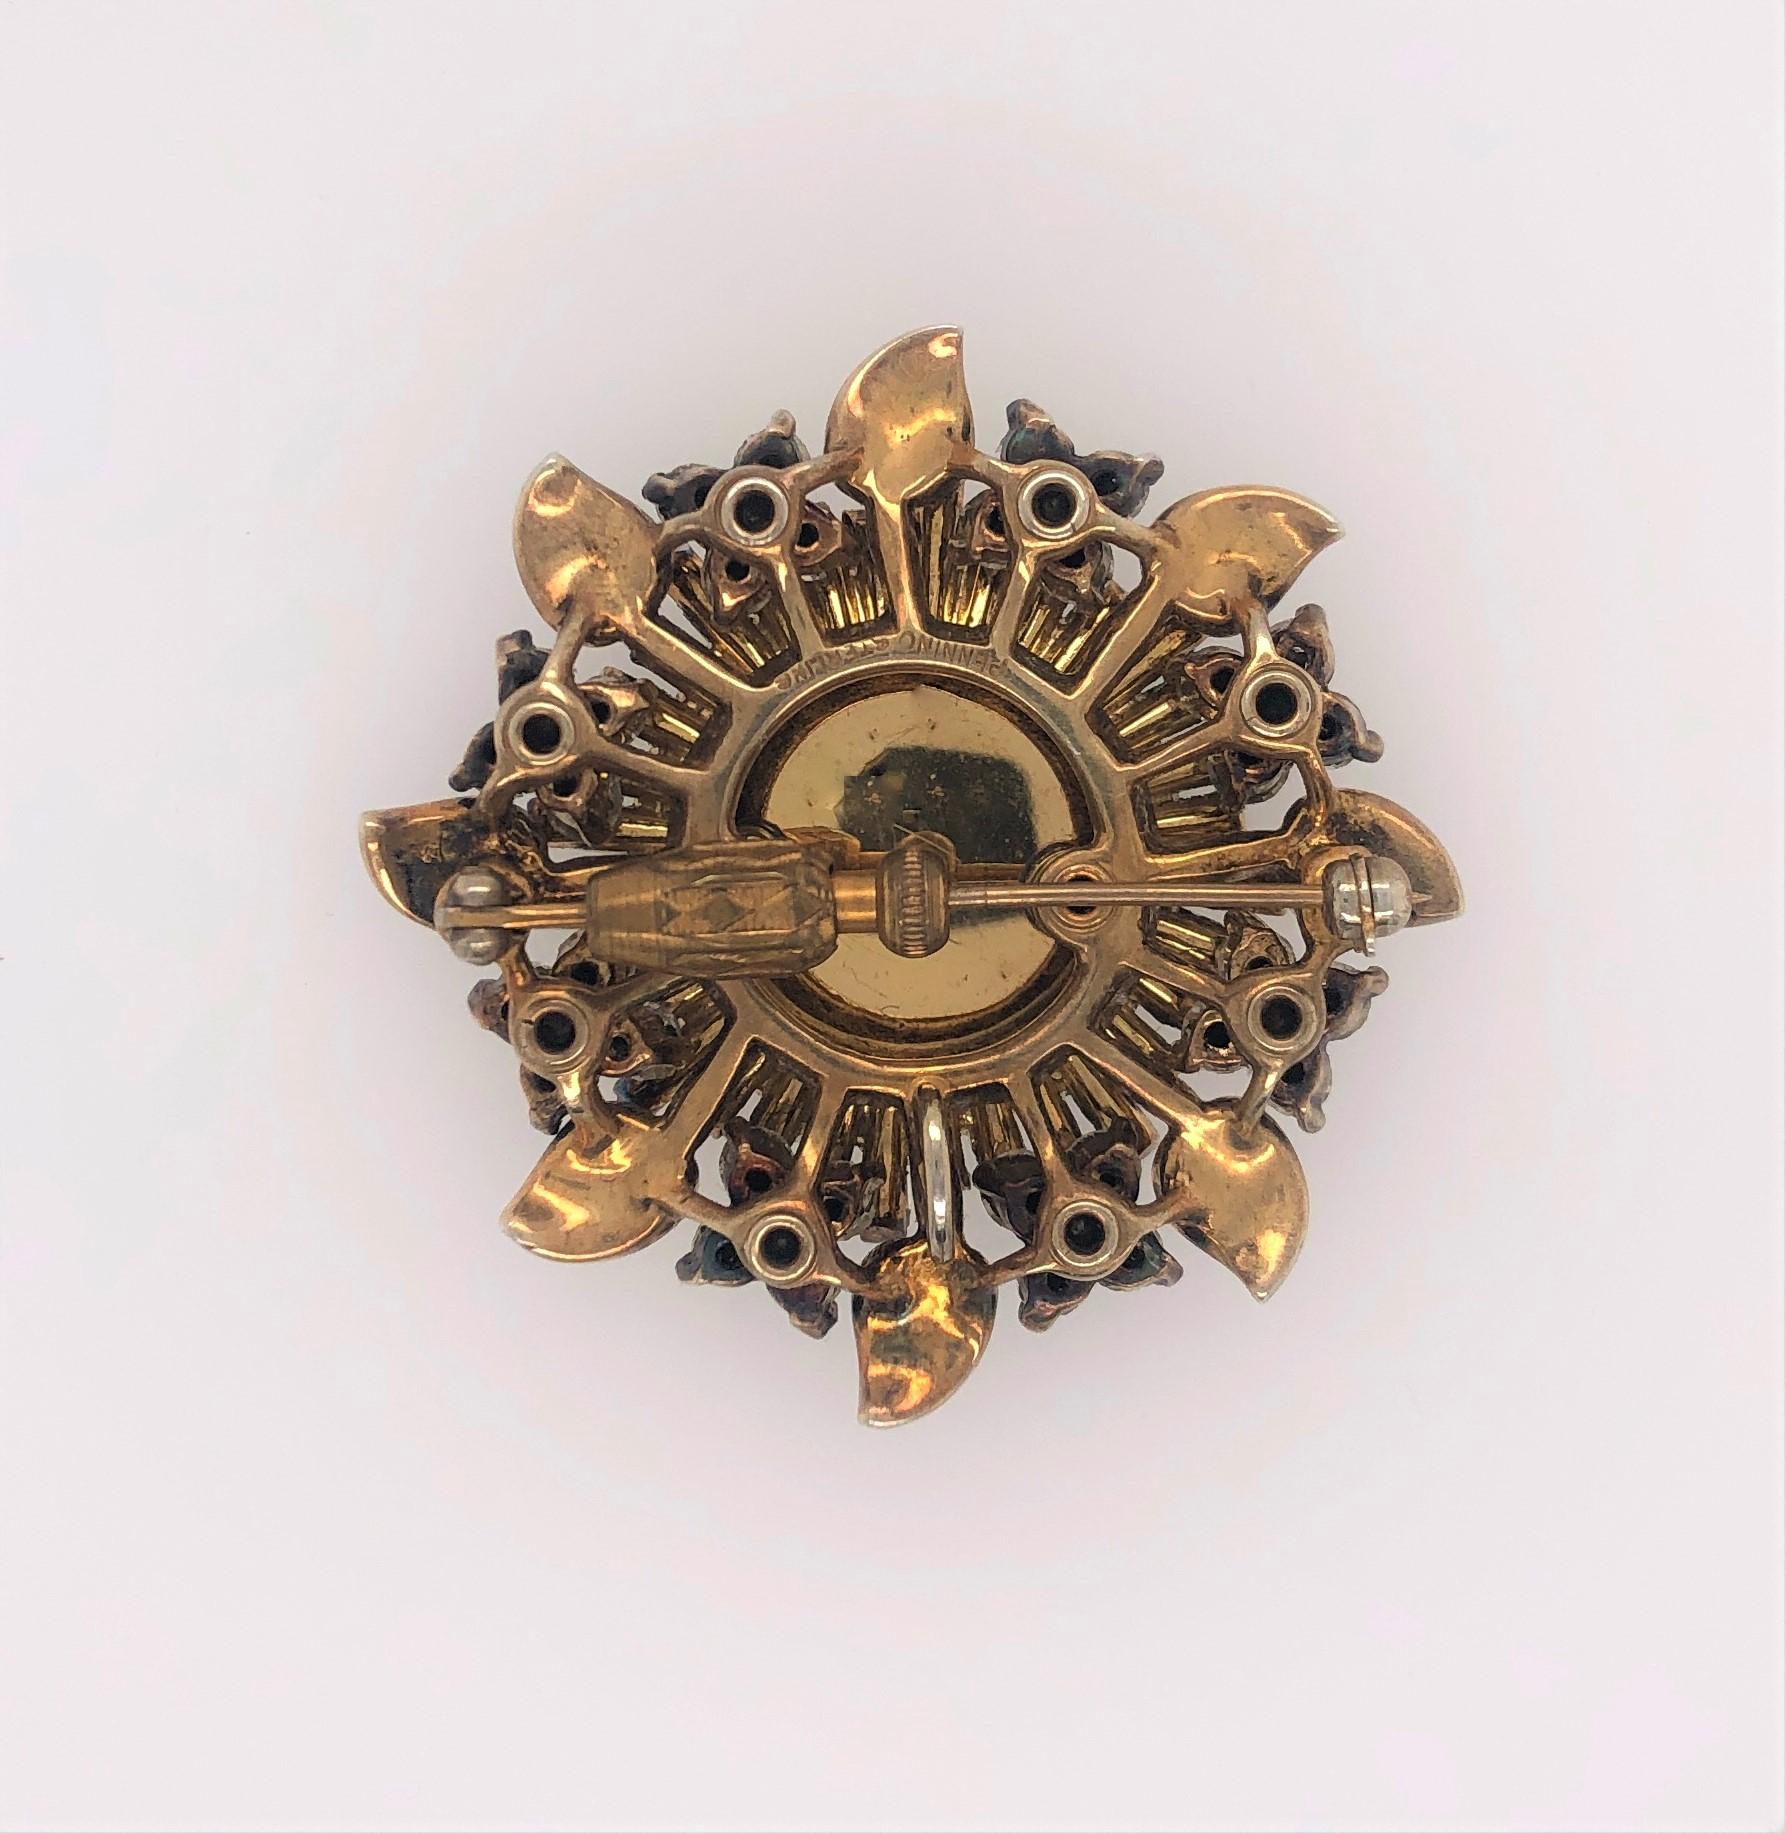 Fabulous vintage floral burst design with a working Pennino Brothers Watch as its center beautifully mixes the sparkle of the quality rhinestones and the gold tone of the vermeil petals on this vintage mid-century brooch pin pendant by the well